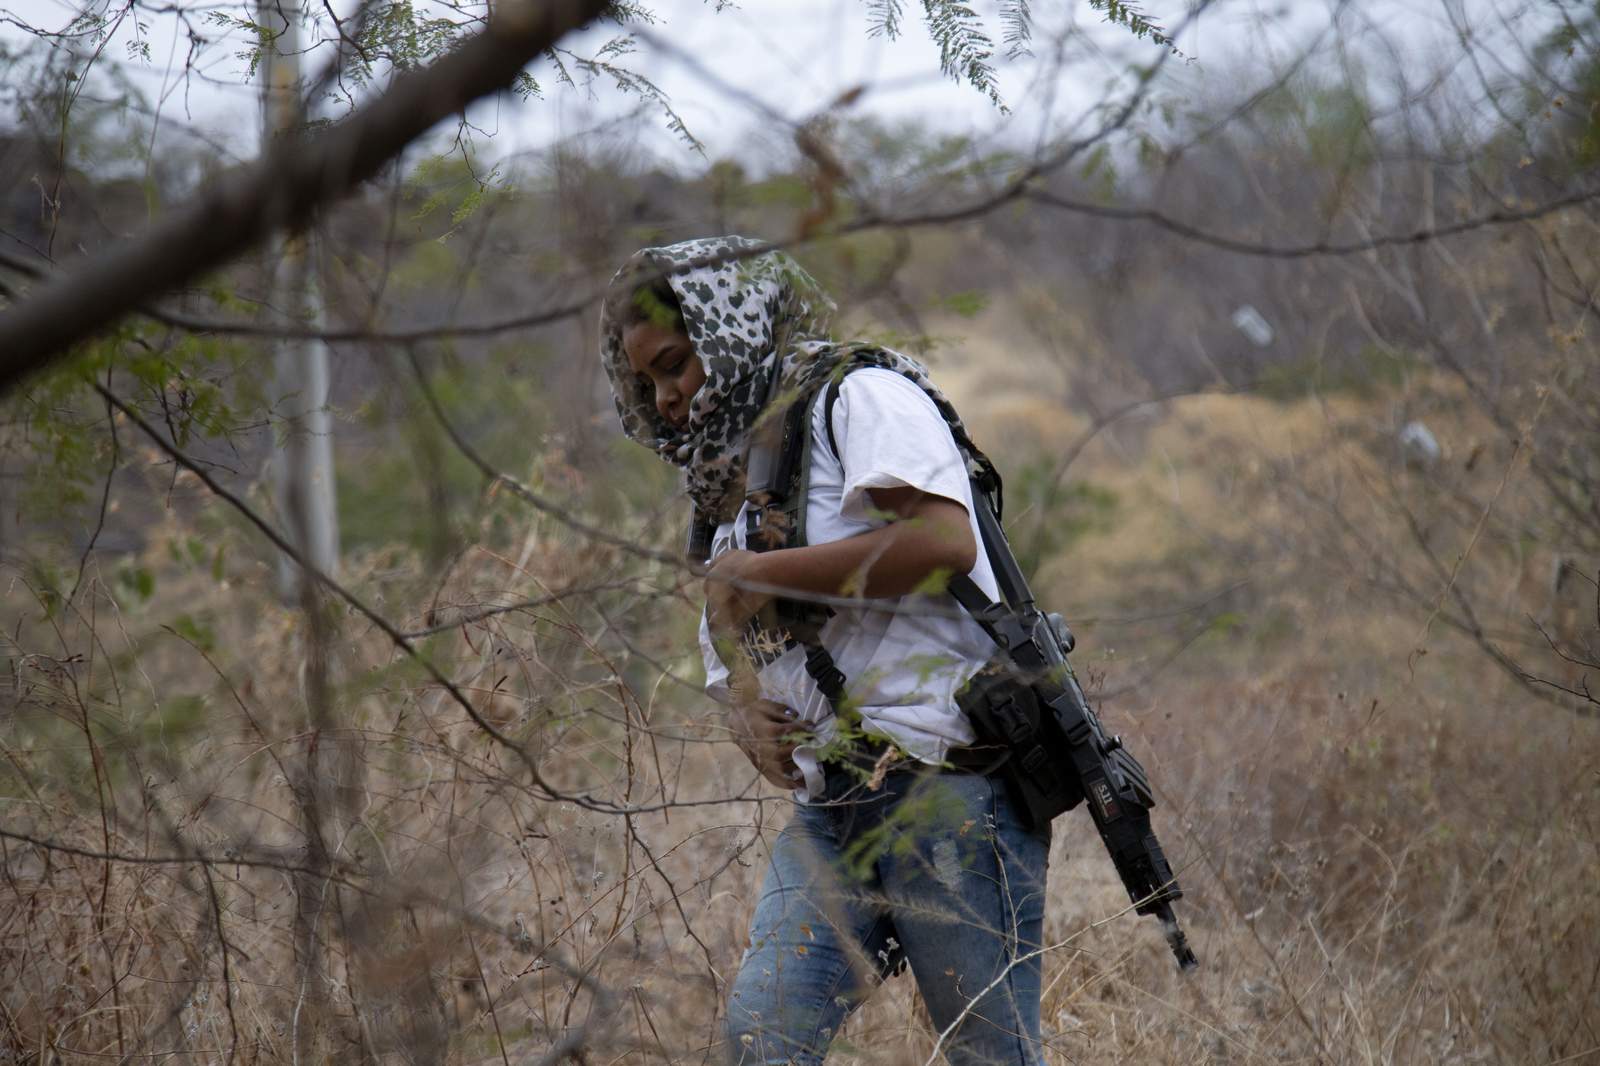 In Mexico, women take the front lines as vigilantes